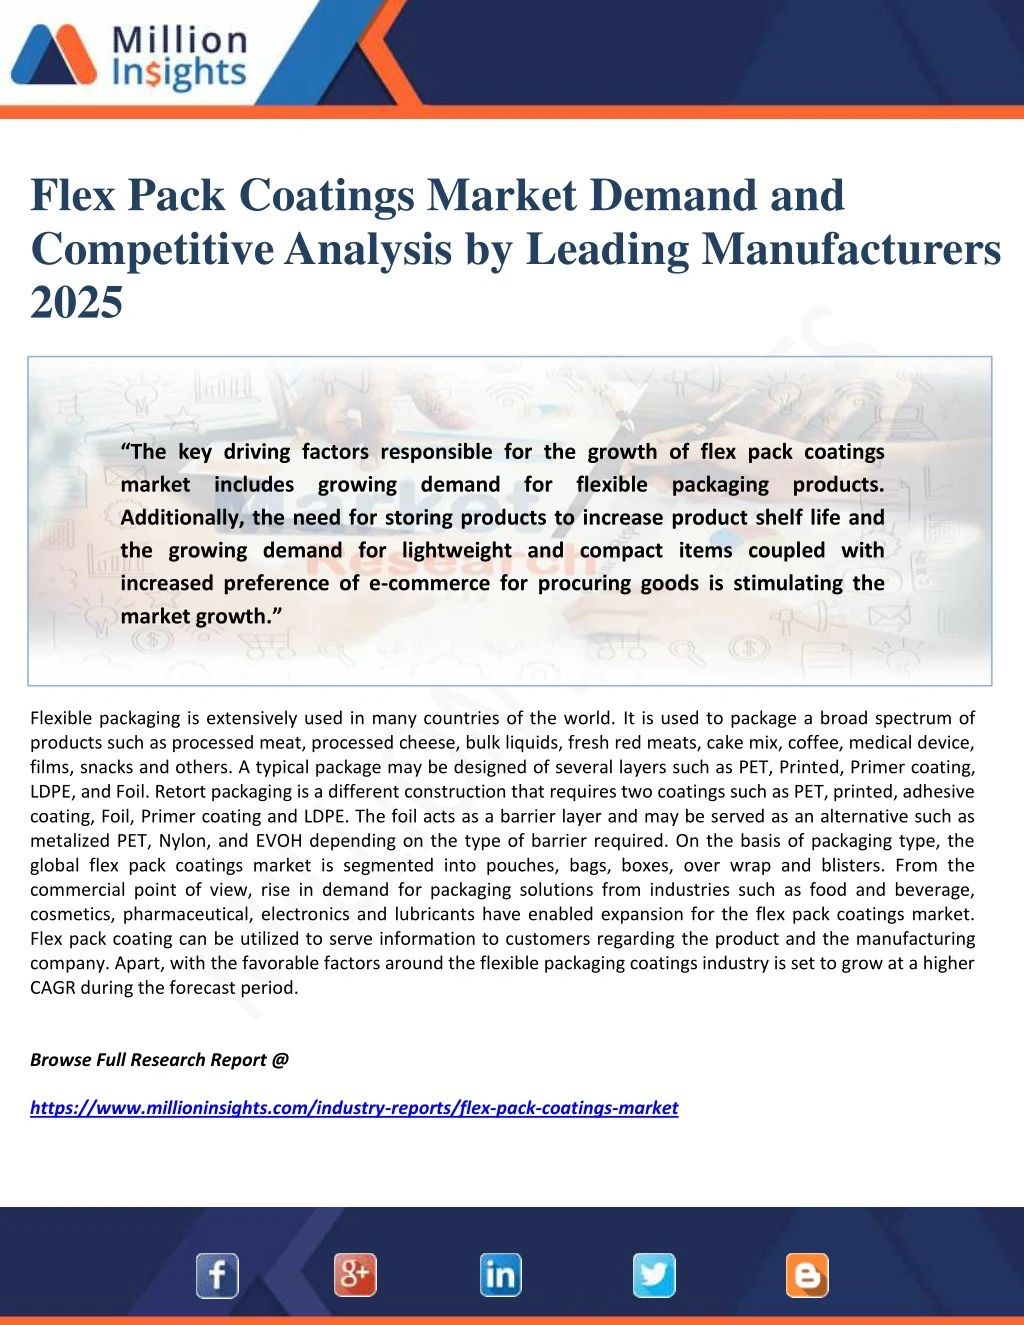 flex pack coatings market demand and competitive